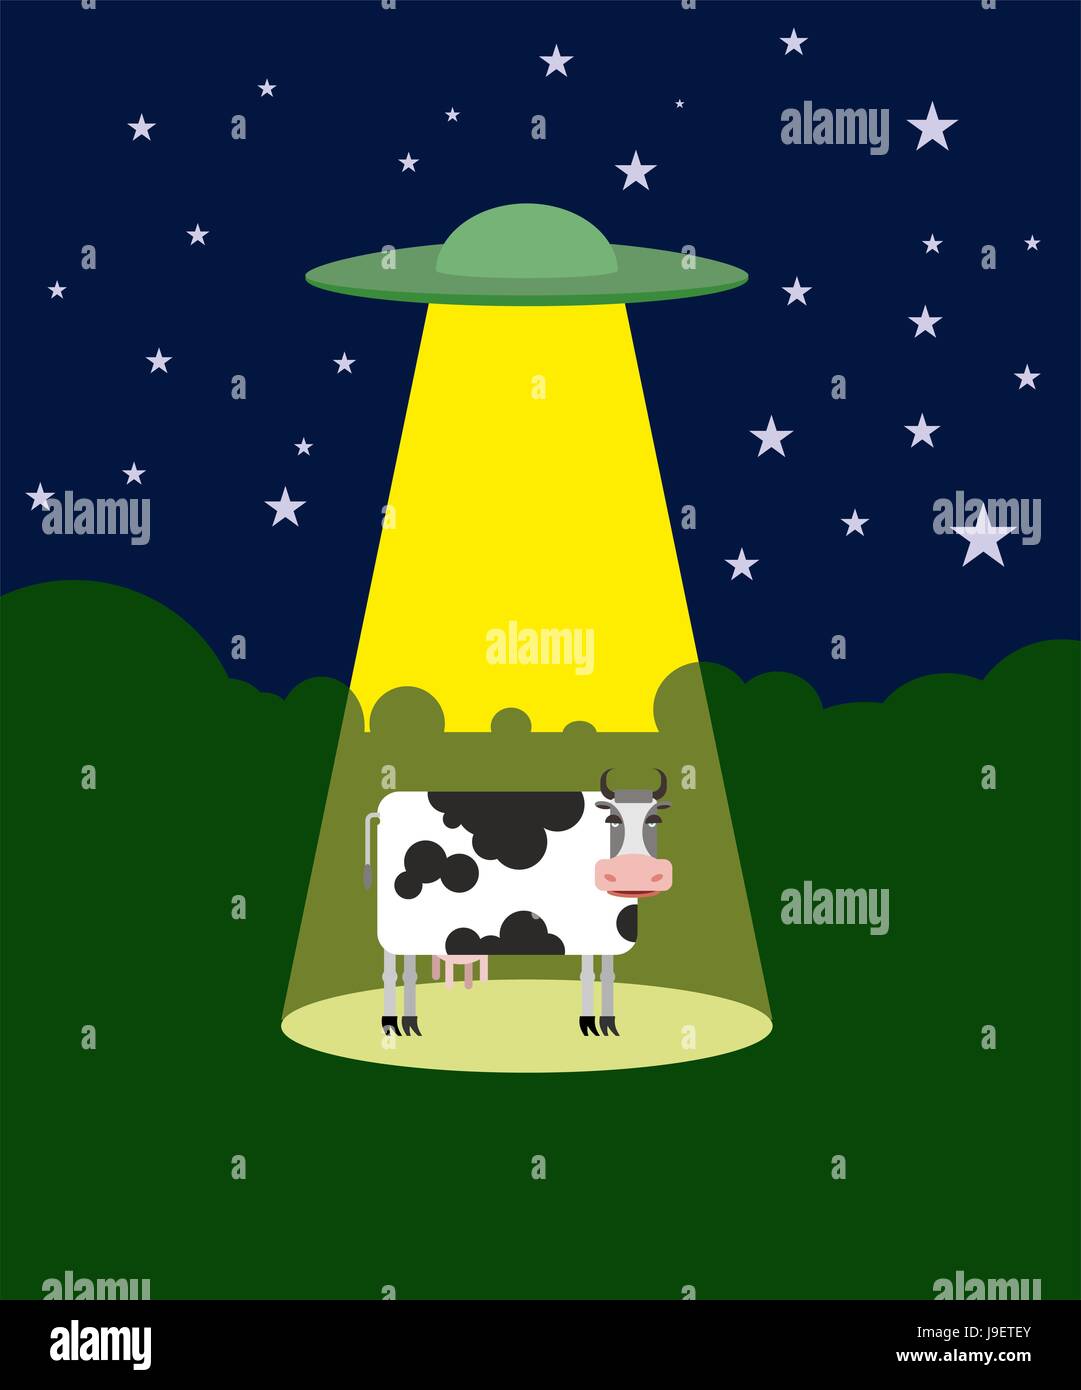 UFO abducts a cow. Space aliens and cattle. Flying saucer beam picks up animal from farm. Vector illustration Stock Vector